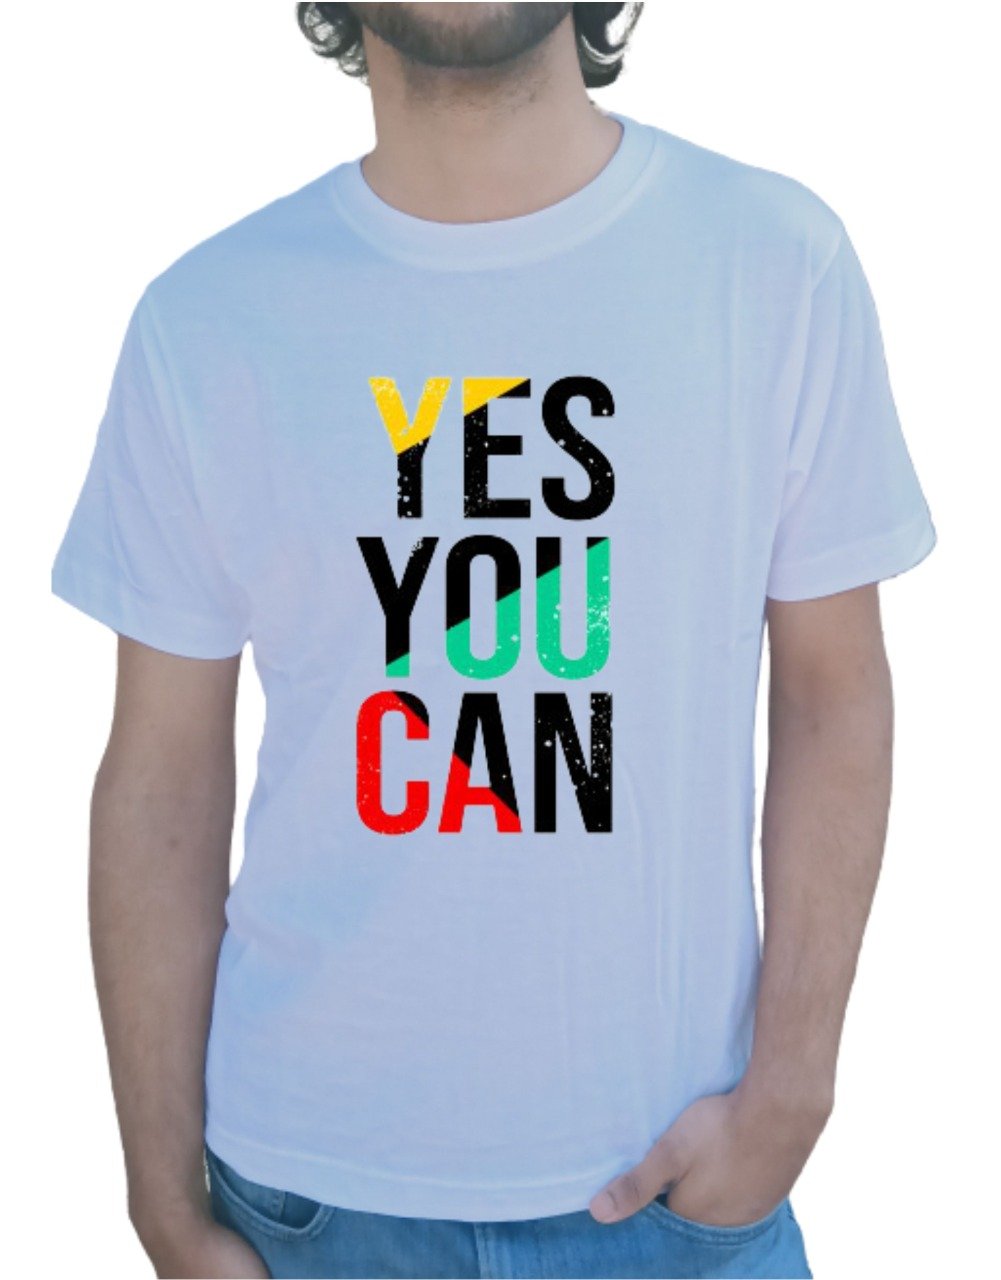 Motivational Quote Printed Cotton T-Shirt (Yes You Can)